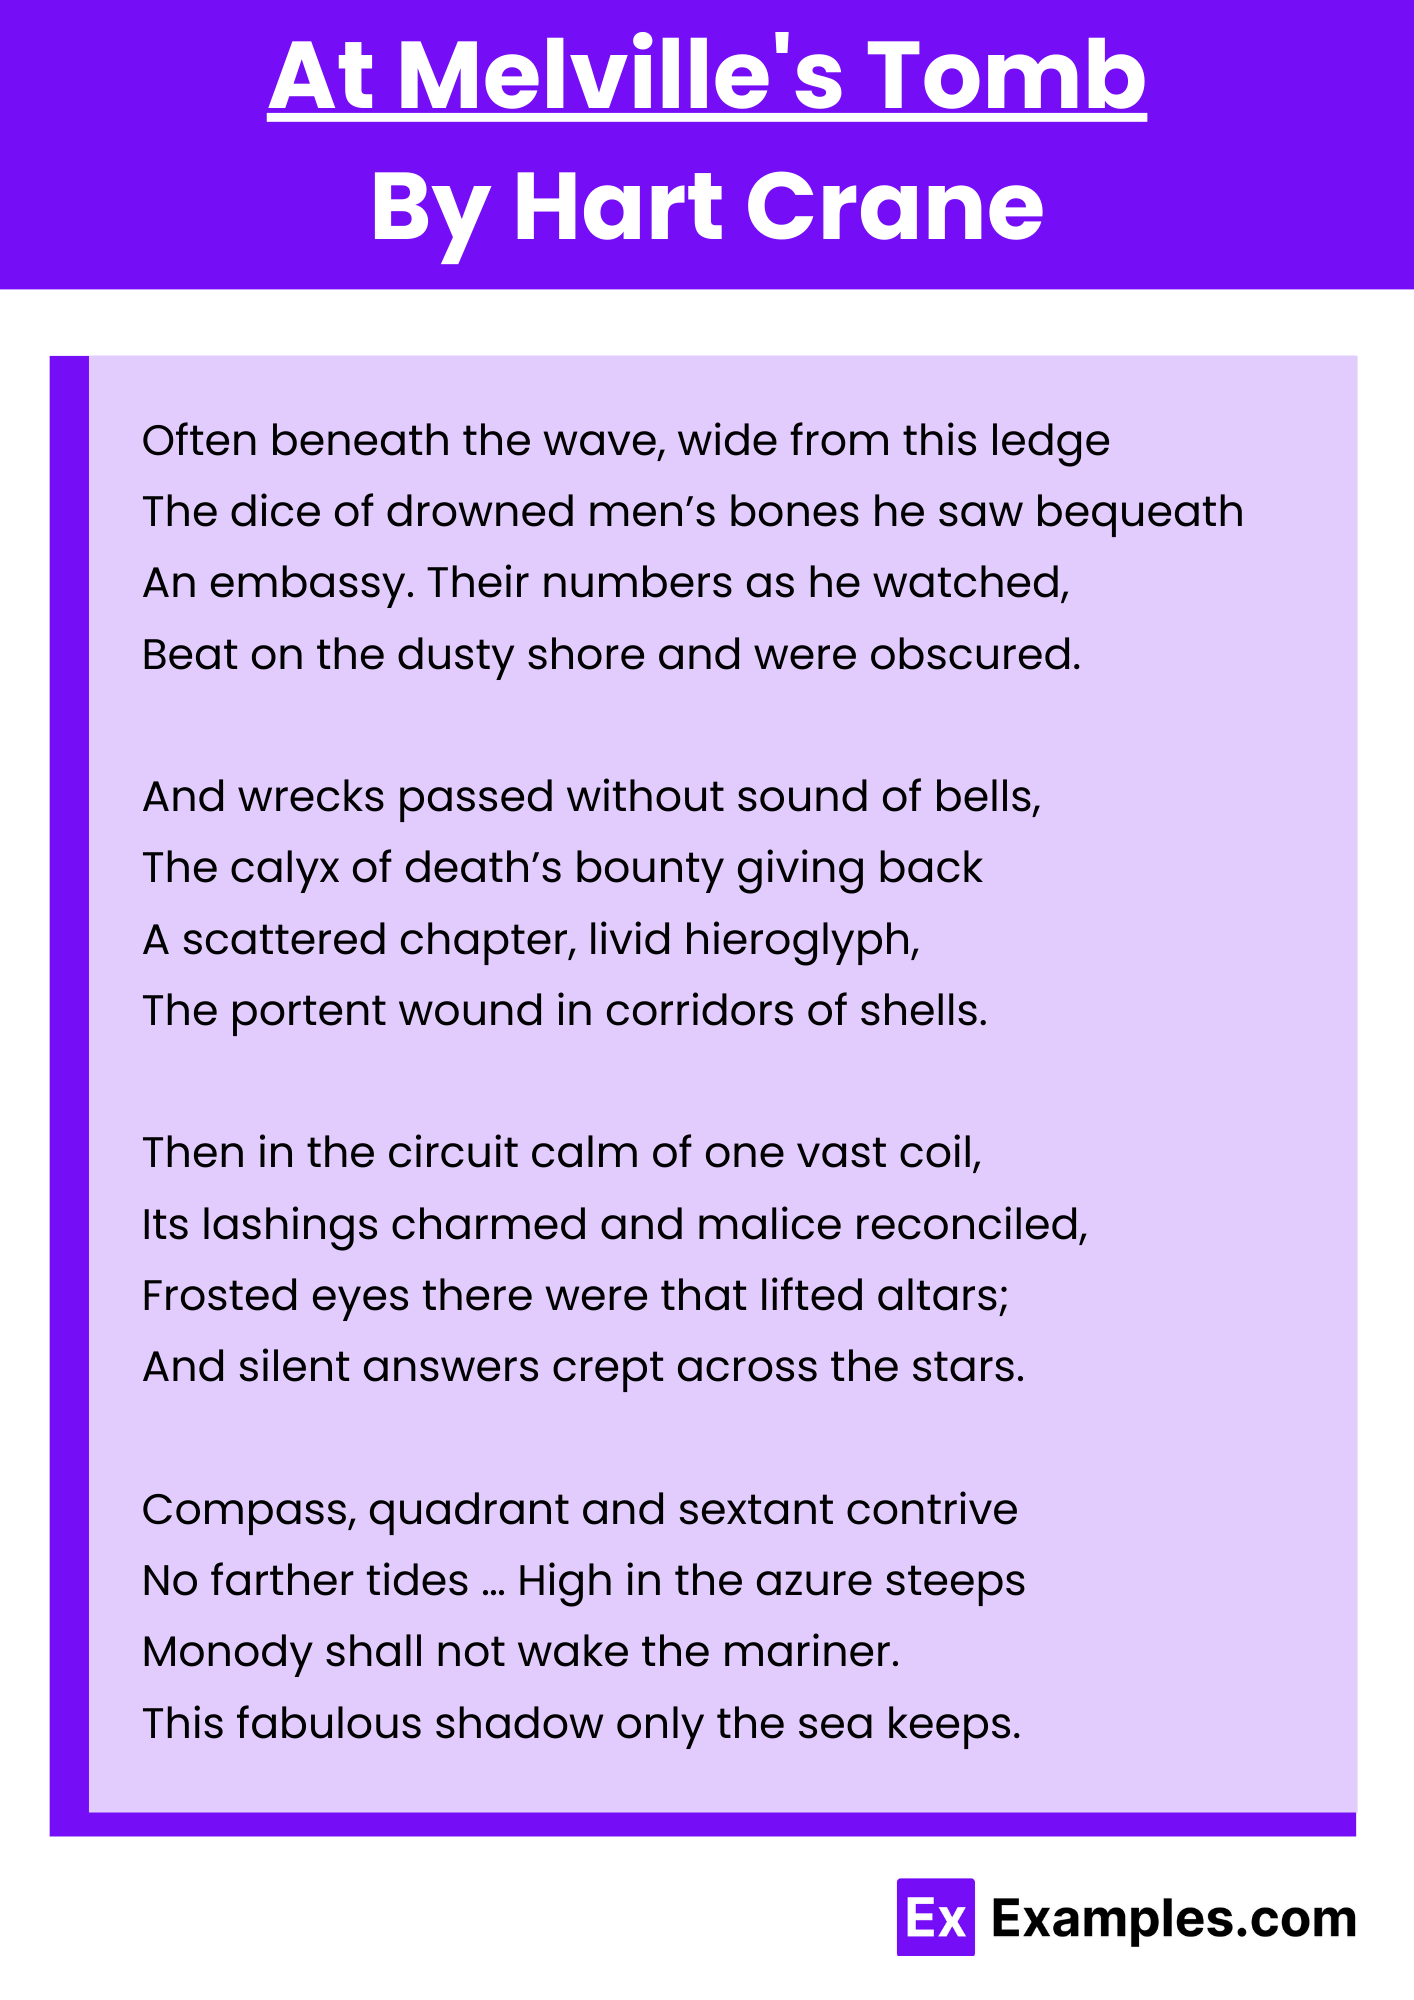 At Melville's Tomb By Hart Crane